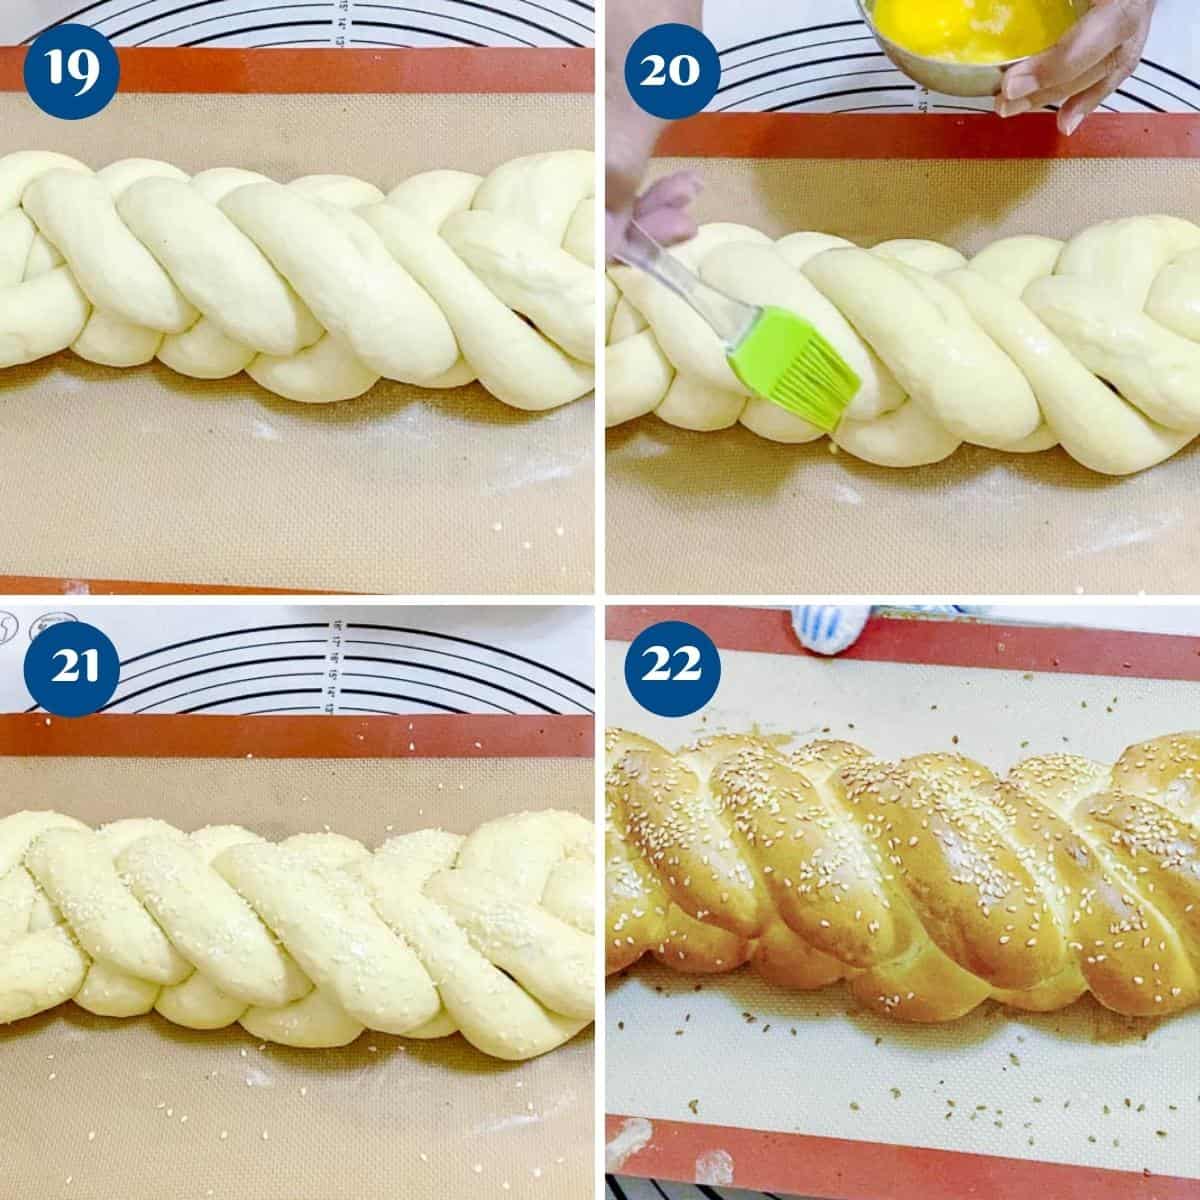 Progress pictures collage for baking 5 strand braided challah.